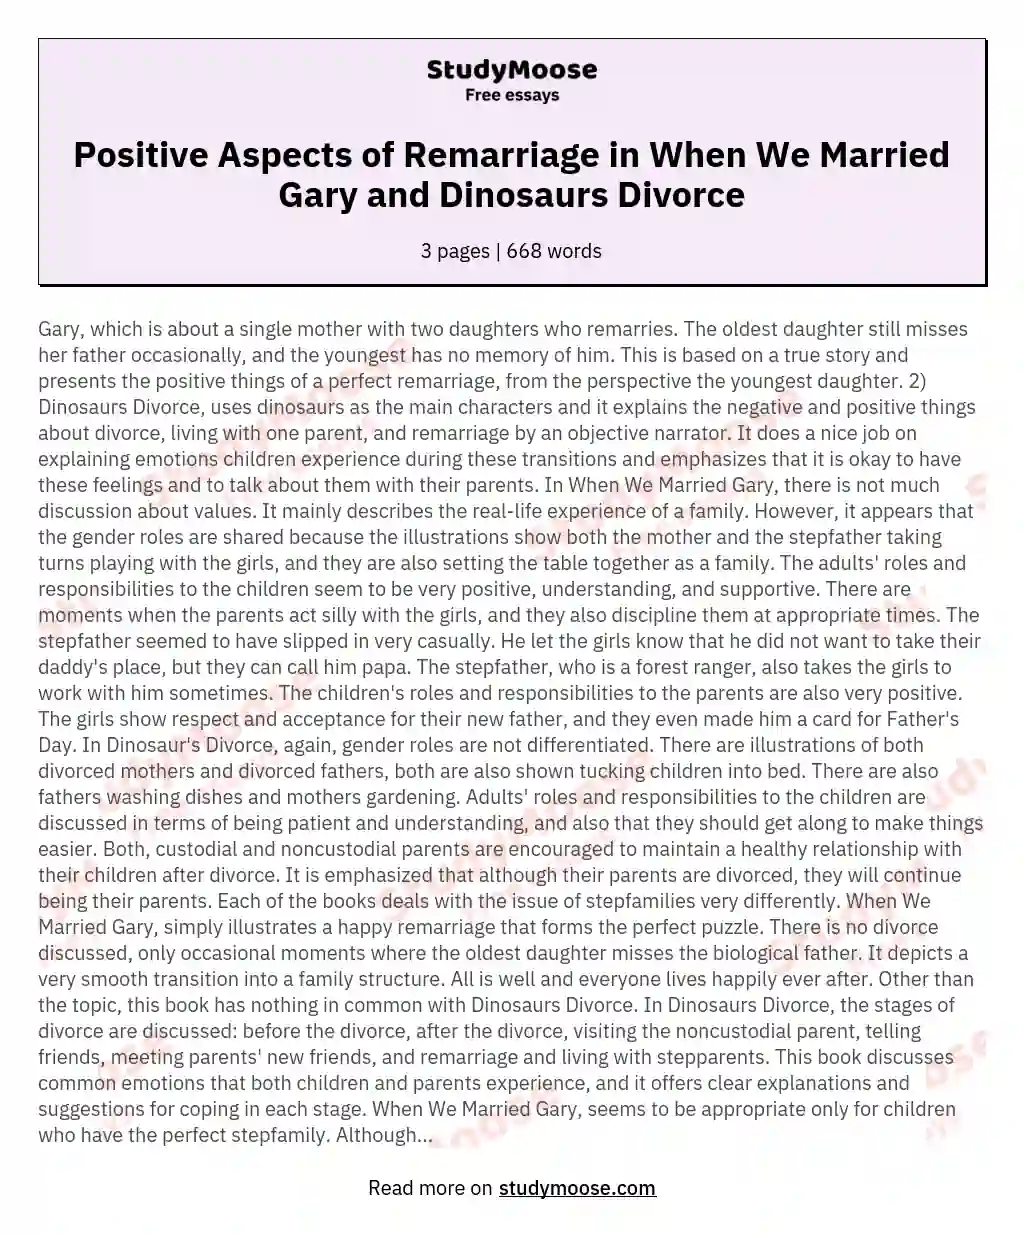 Positive Aspects of Remarriage in When We Married Gary and Dinosaurs Divorce essay